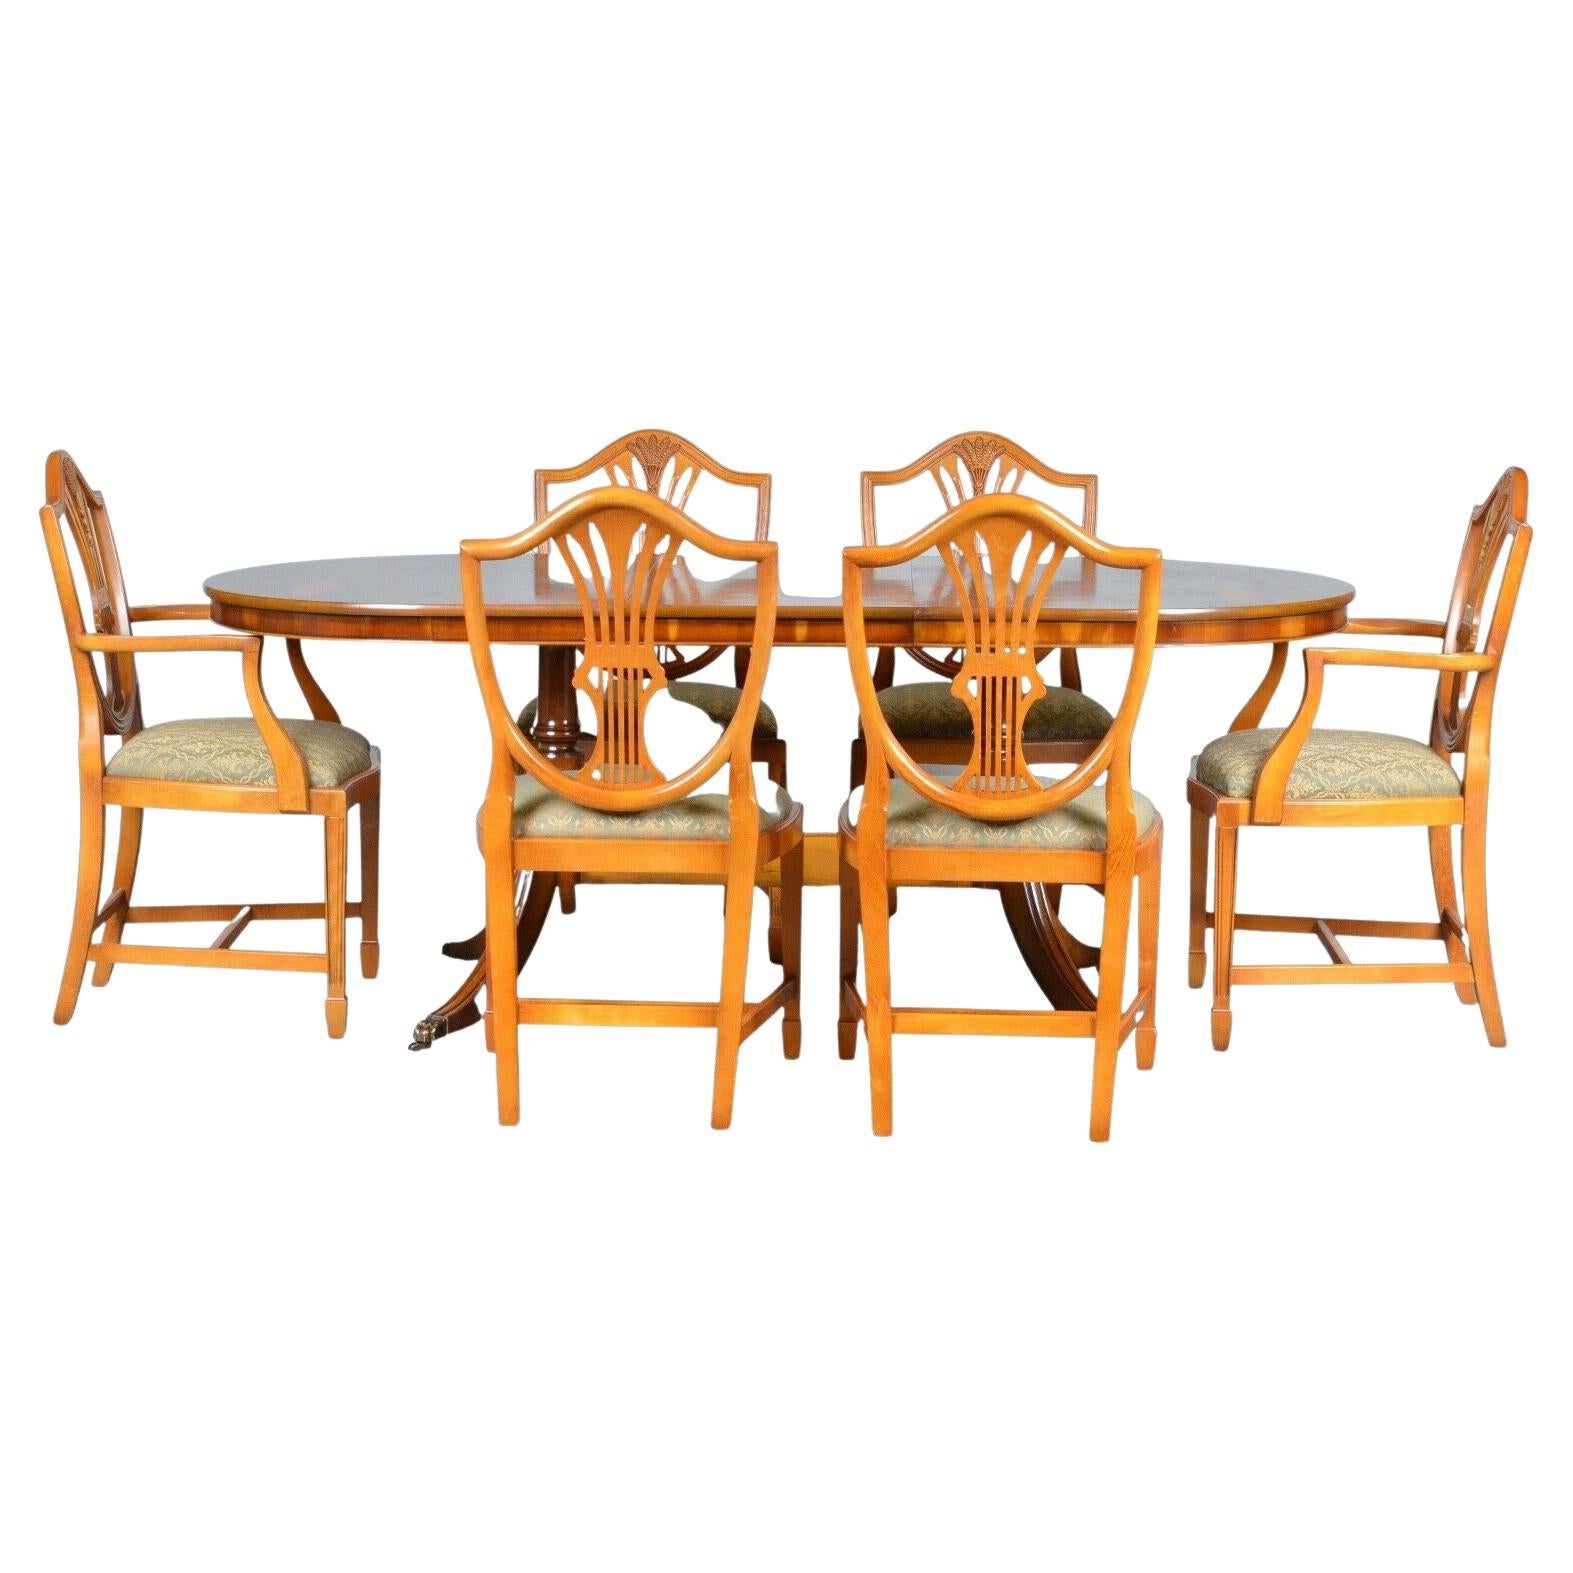 EXTENDING OVAL BURR YEW DINING TABLE & 6 CHAiRS REGENCY STYLE